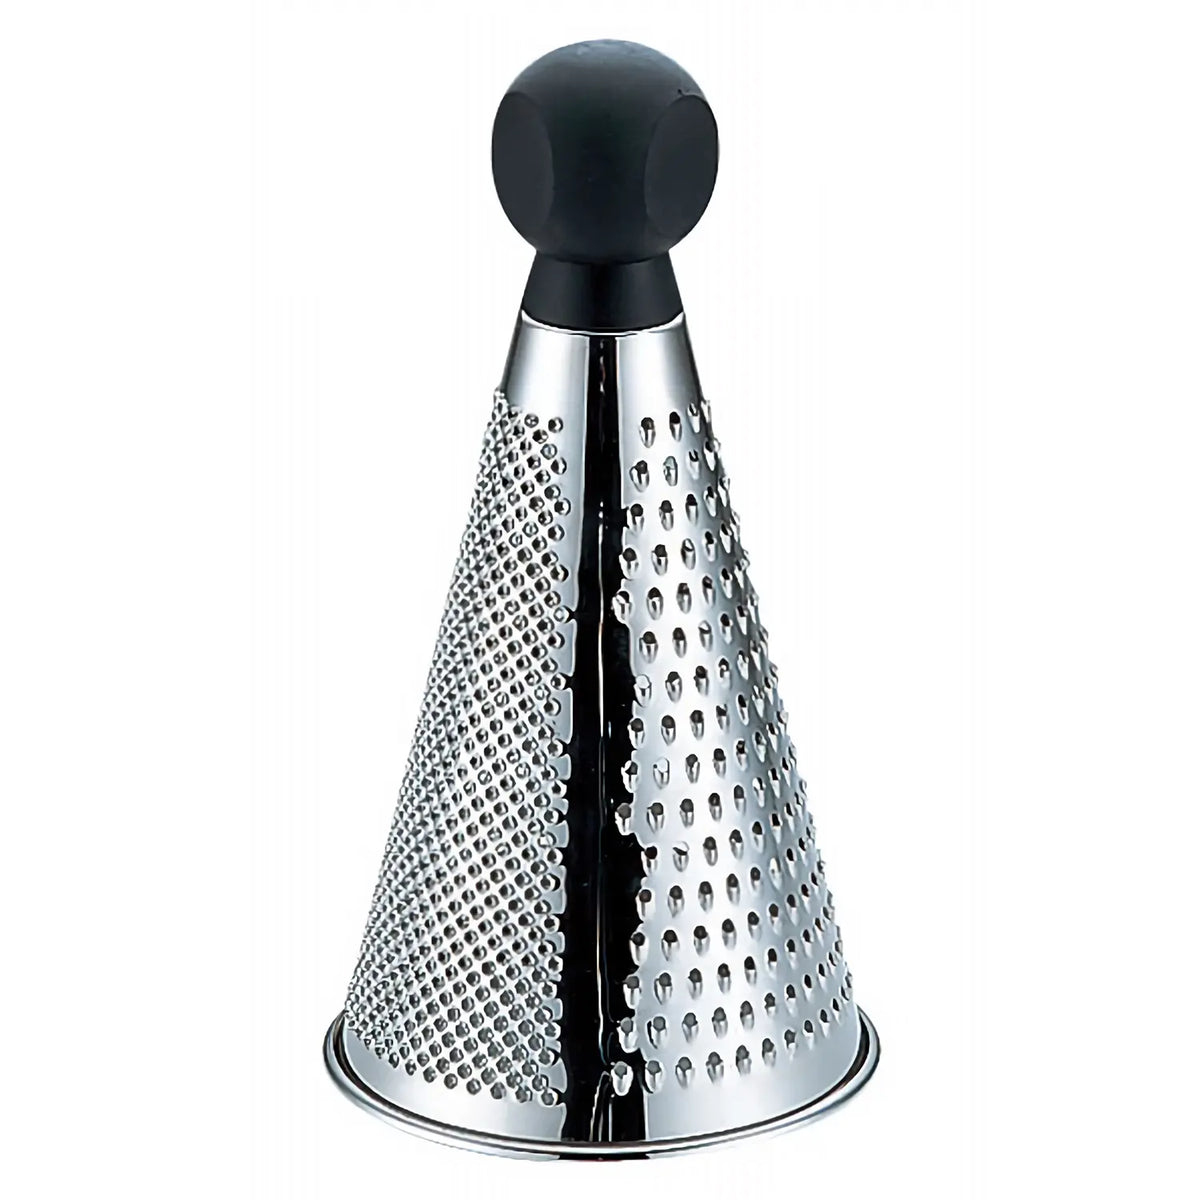 YUKIWA Stainless Steel Conical Cheese Grater